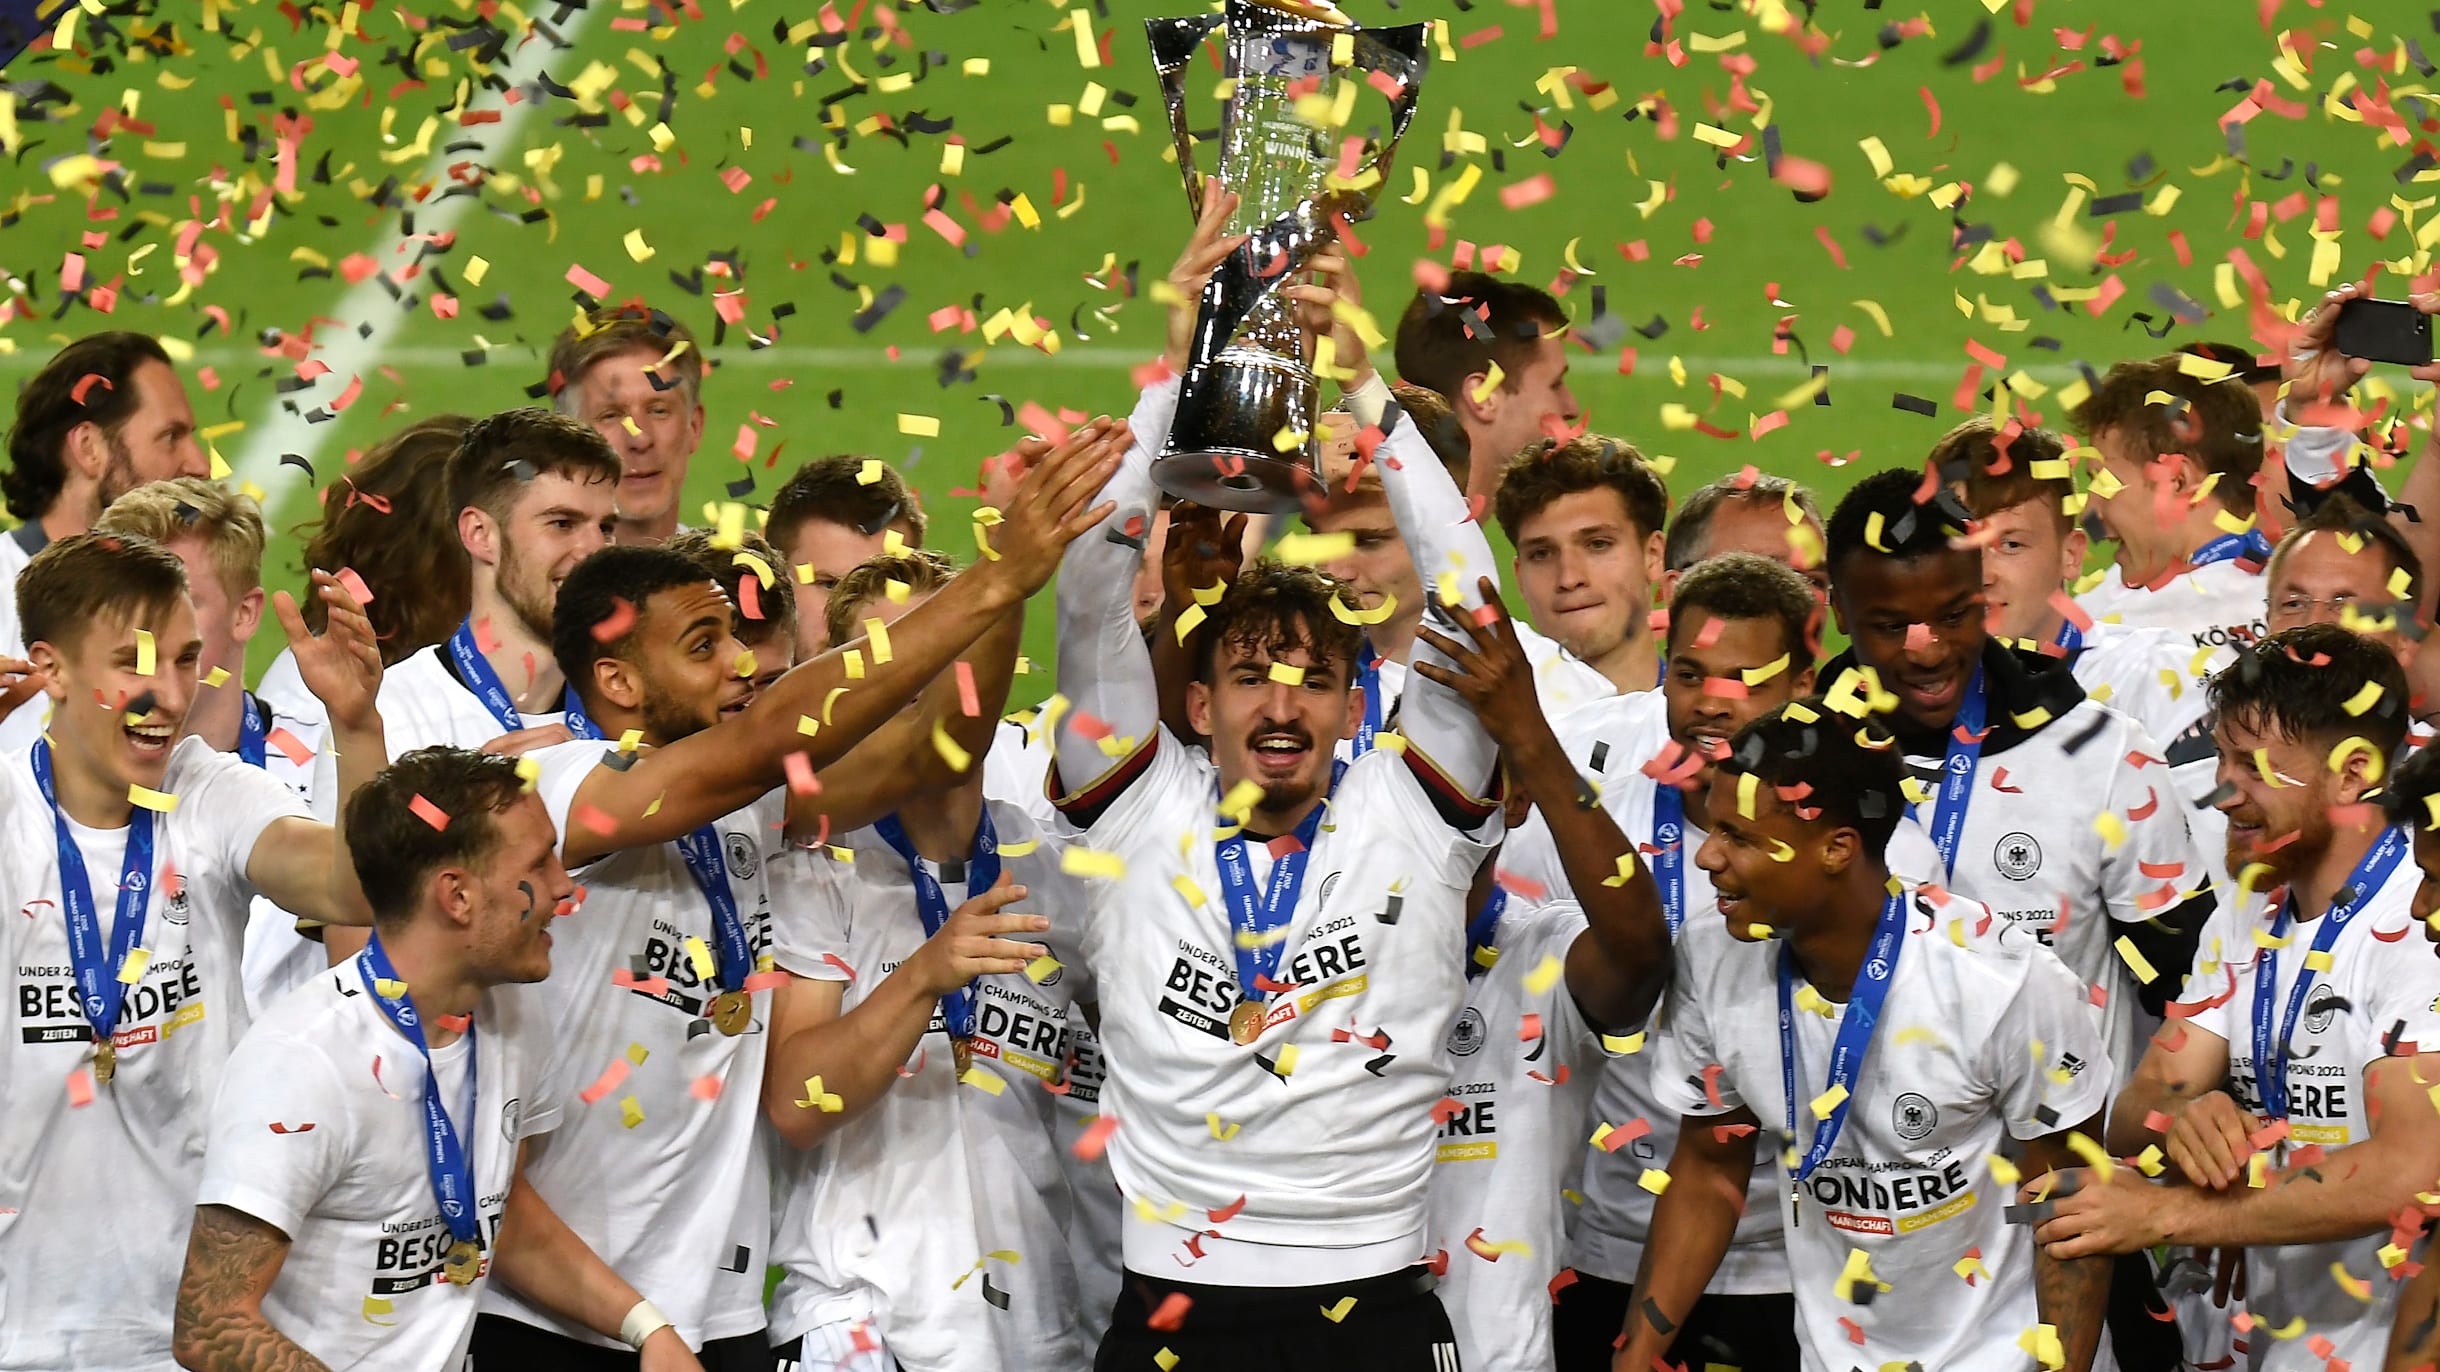 2023 UEFA European Under-21 Championship: All fixtures, results